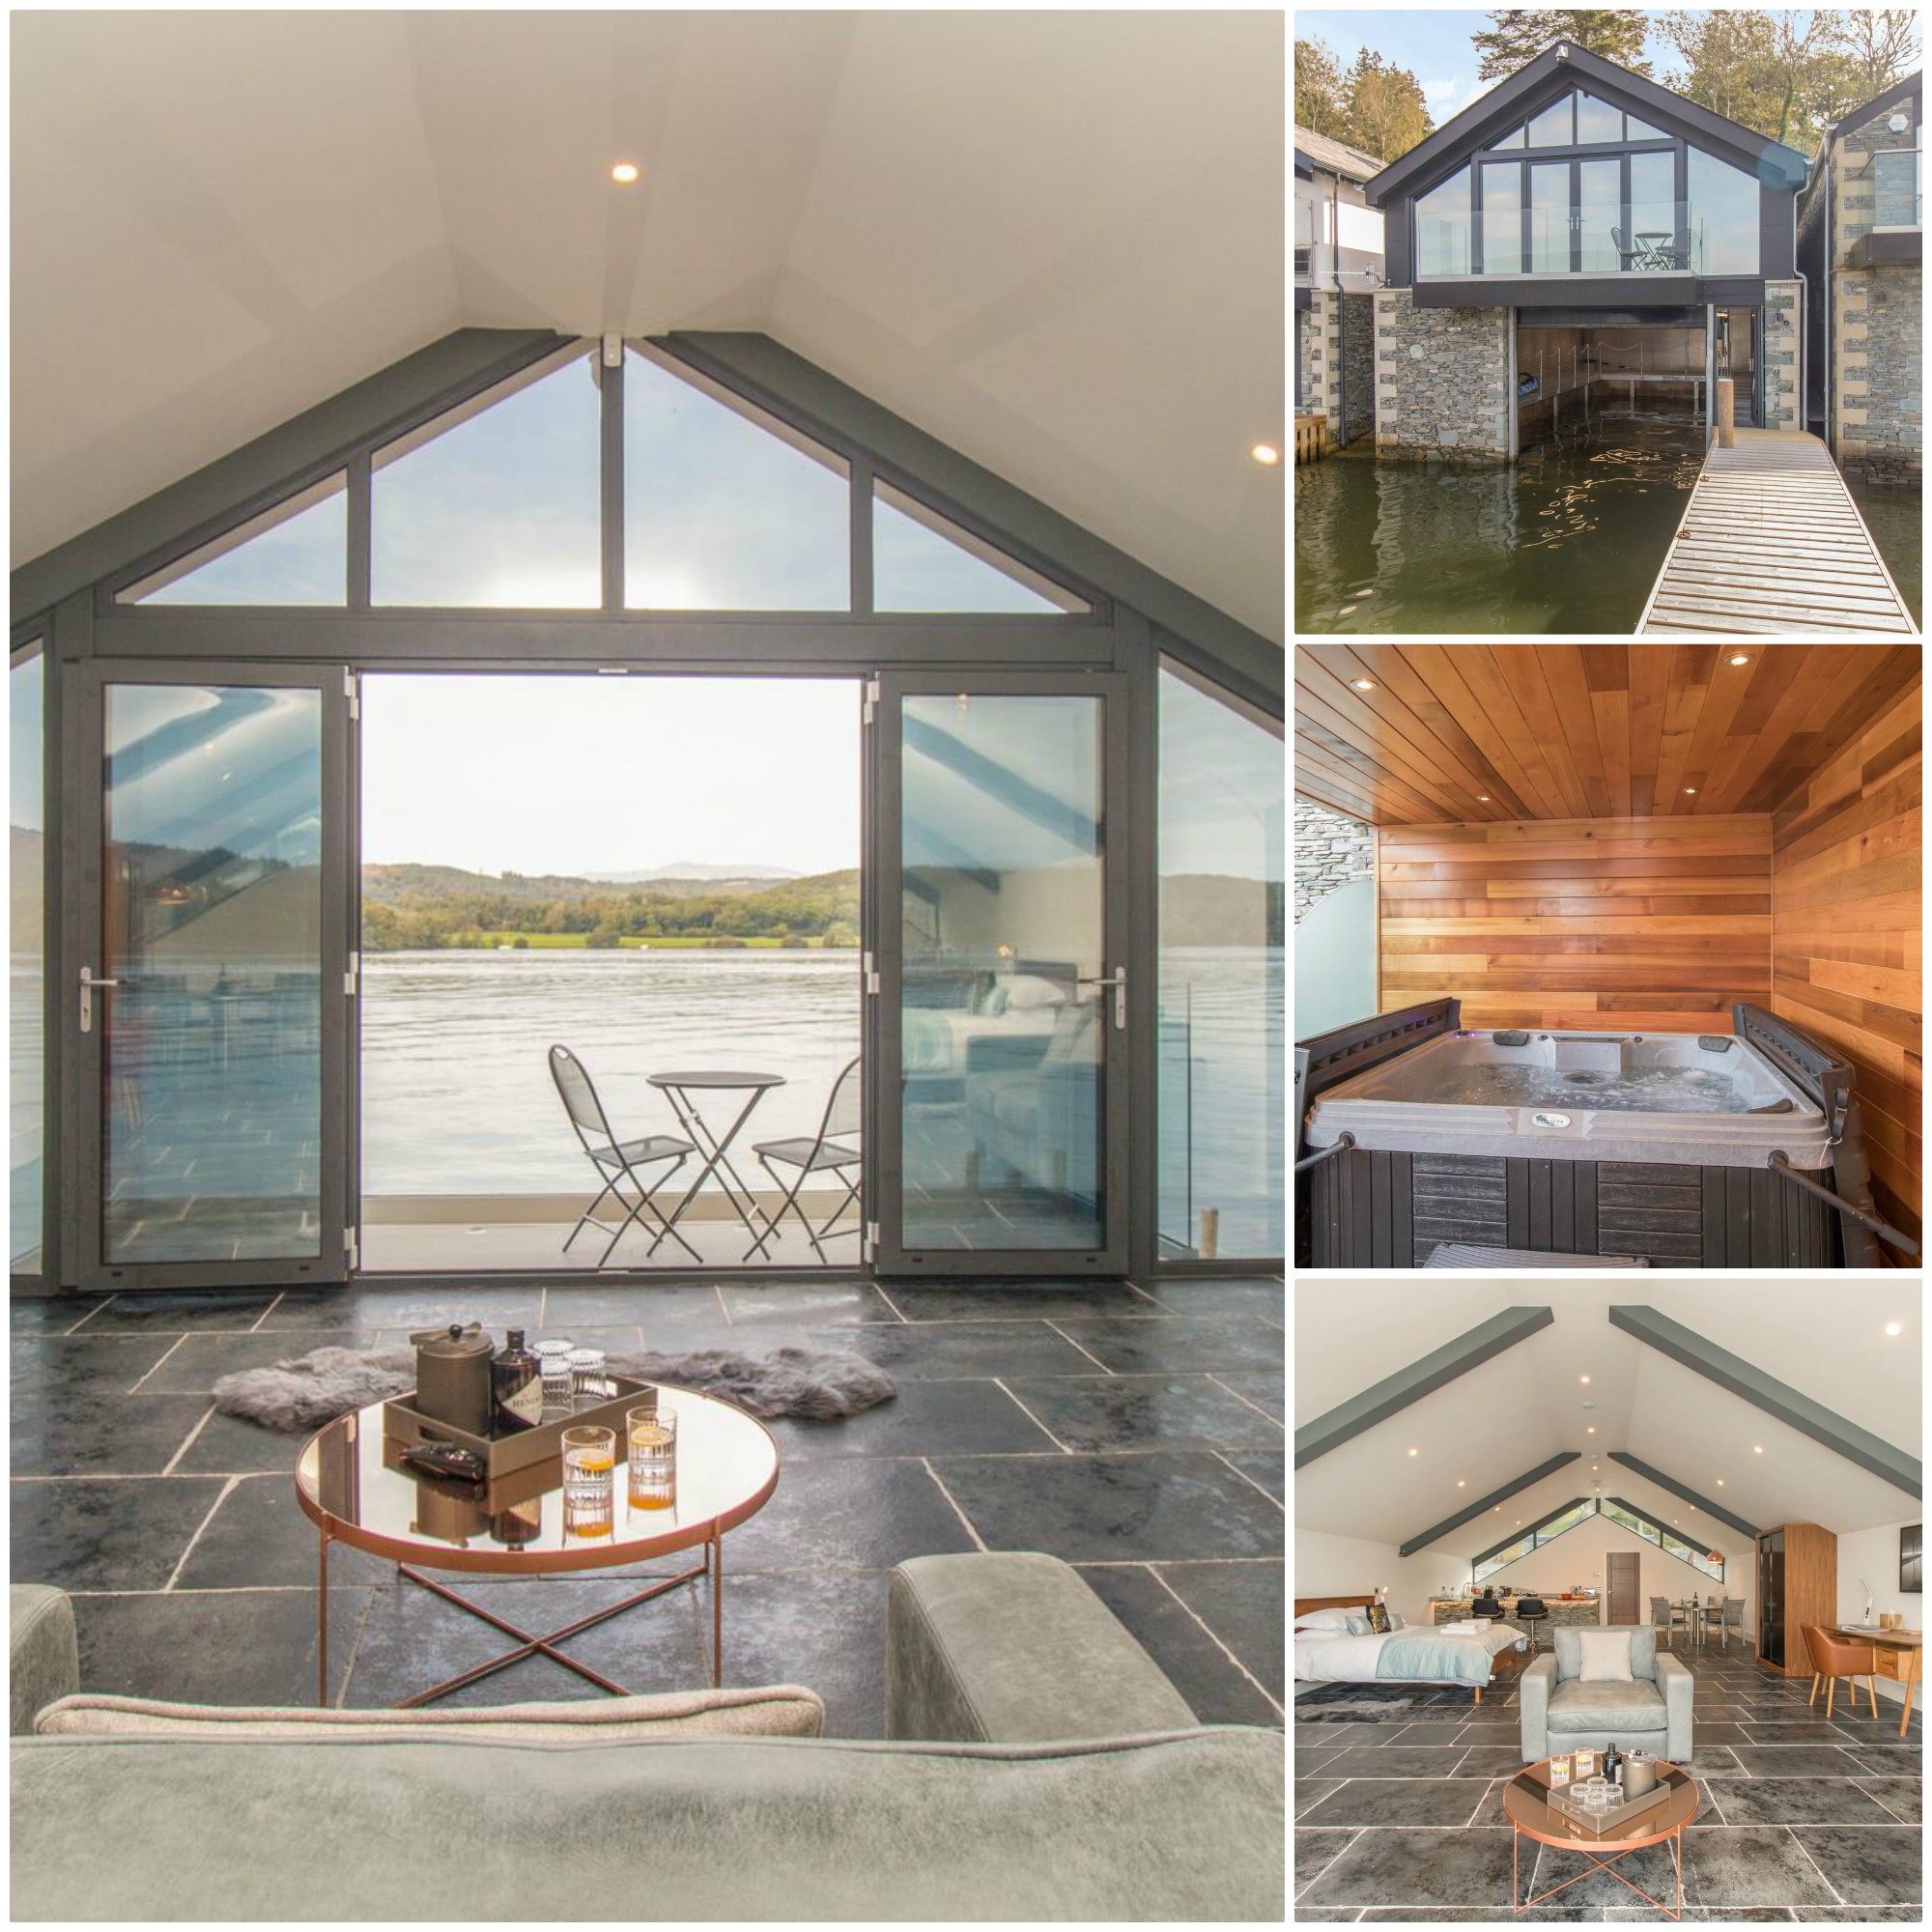 luxurious lake frontage accommodation for 2 in the heart of the English Lake District